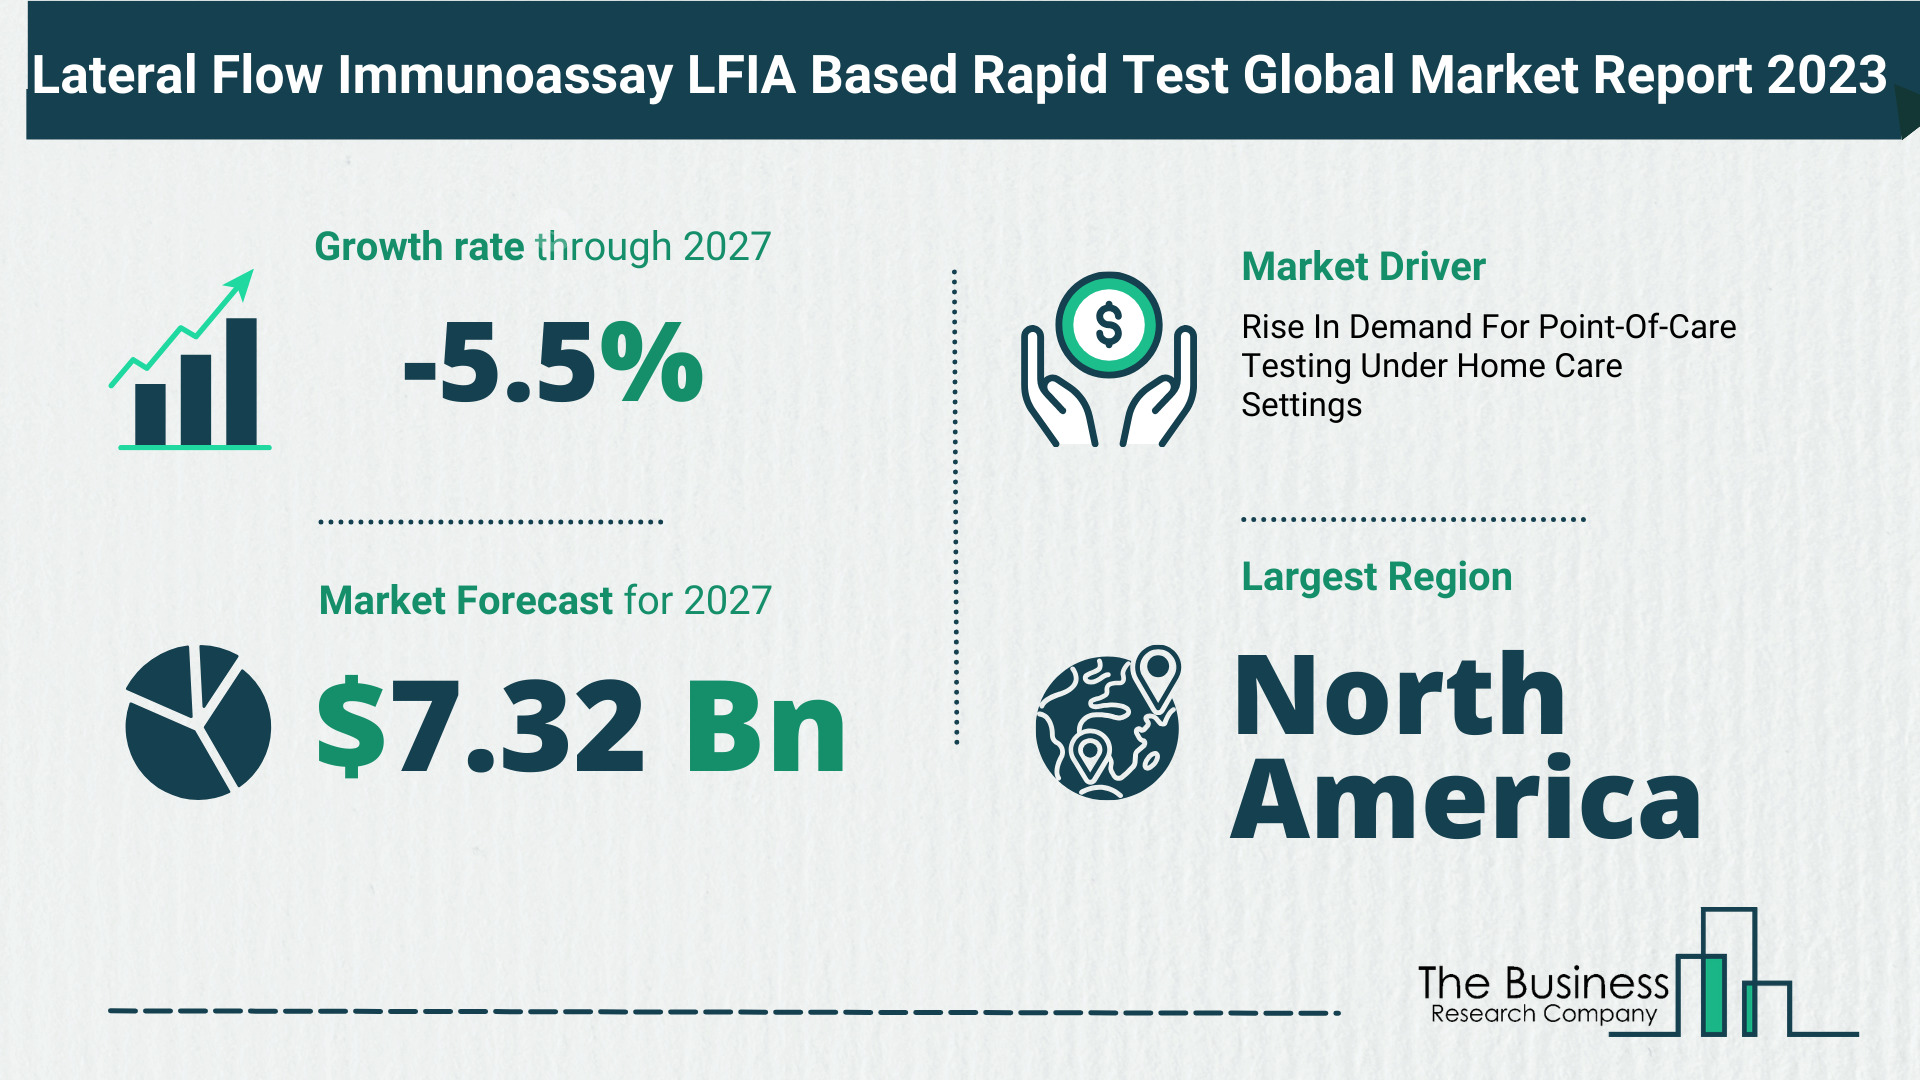 Global Lateral Flow Immunoassay LFIA Based Rapid Test Market Report 2023 – Top Market Trends And Opportunities